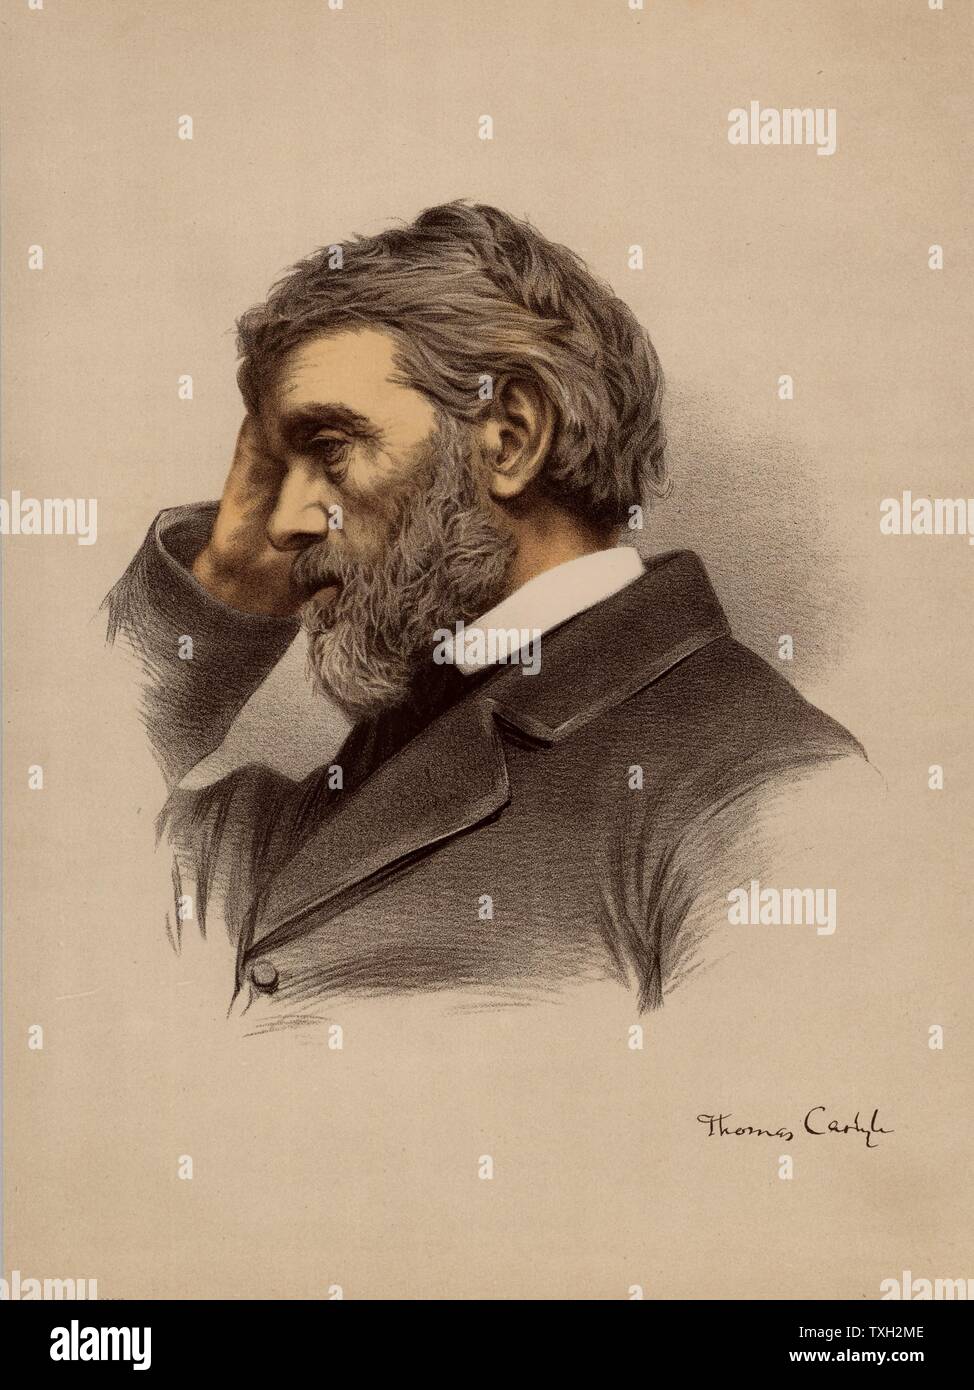 Thomas Carlyle (1795-1881) Scottish-born British historian & essayist.  From 'The National Portrait Gallery' (London, c1880). Tinted lithograph. Stock Photo